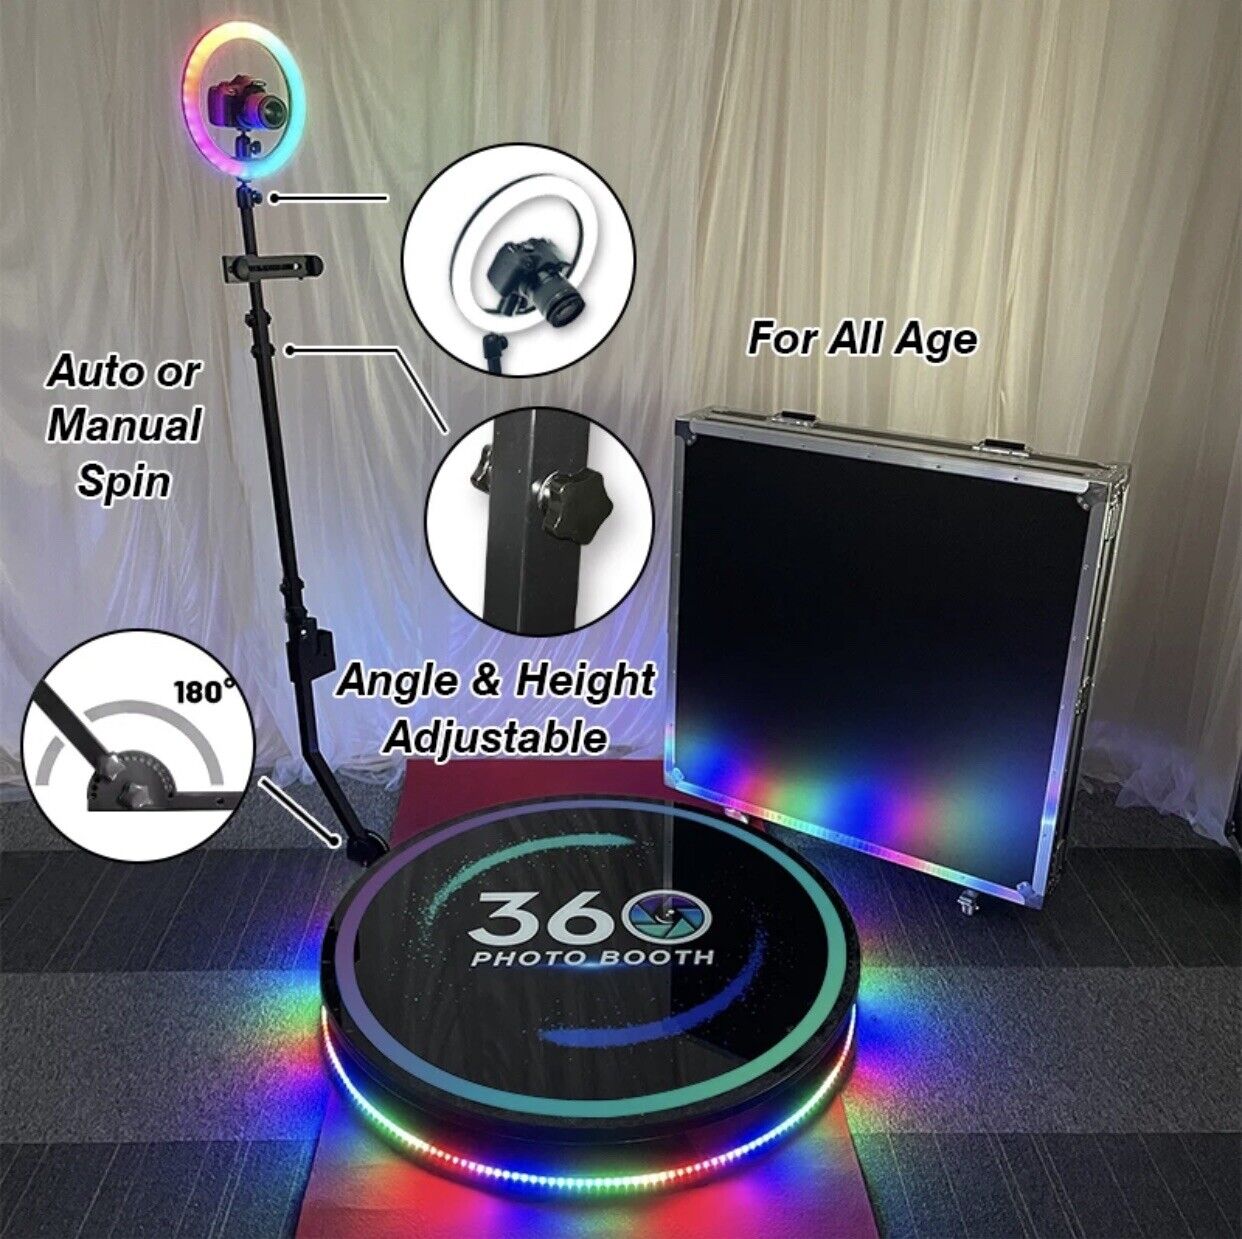 360 PHOTO BOOTH- VIDEO BOOTH PLATFORM AUTOMATIC SPINNER MOTORIZED